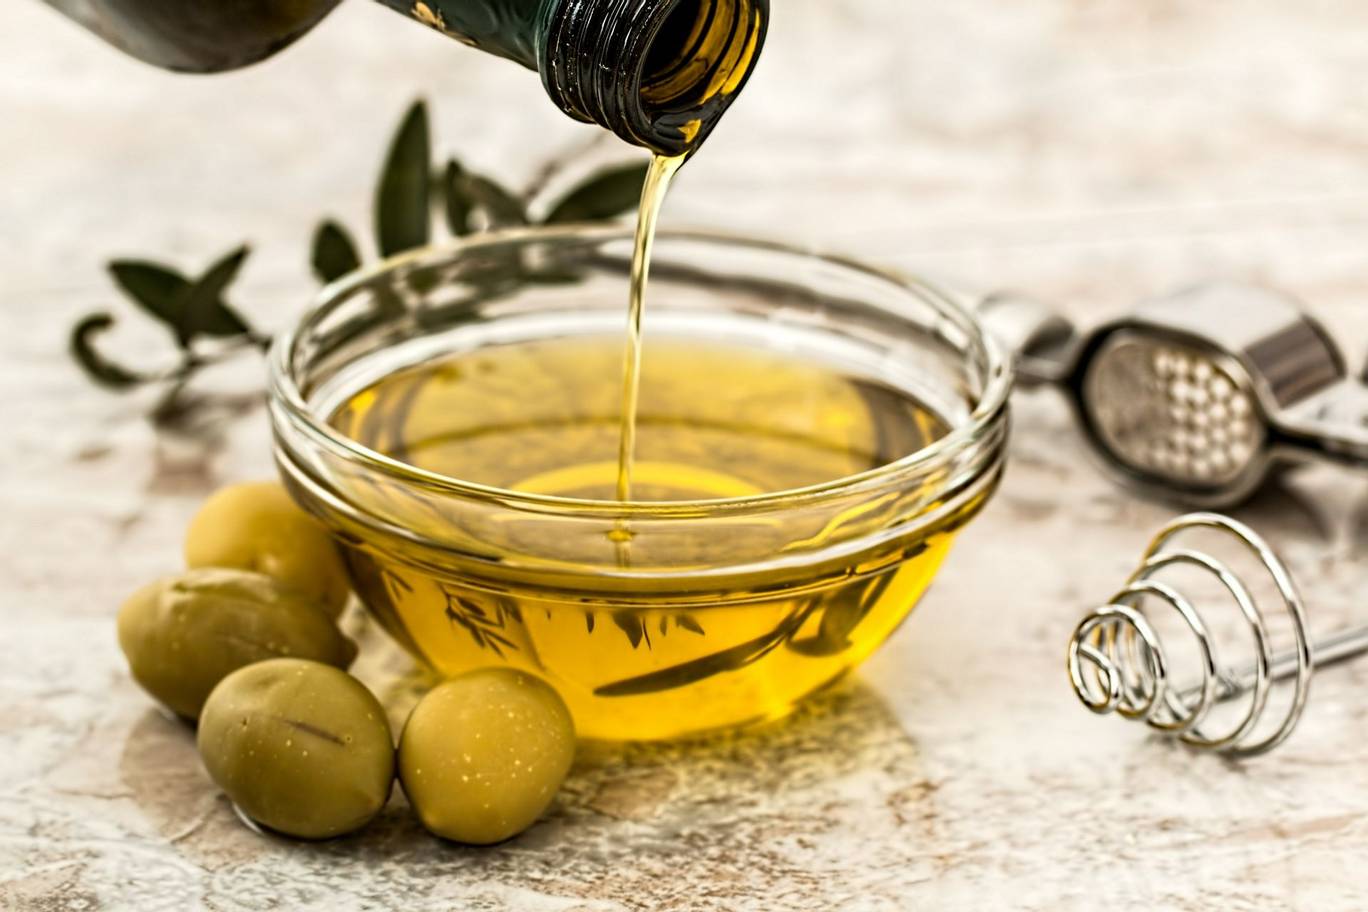 Olive oil offers lots of antioxidants and can reduce inflammation